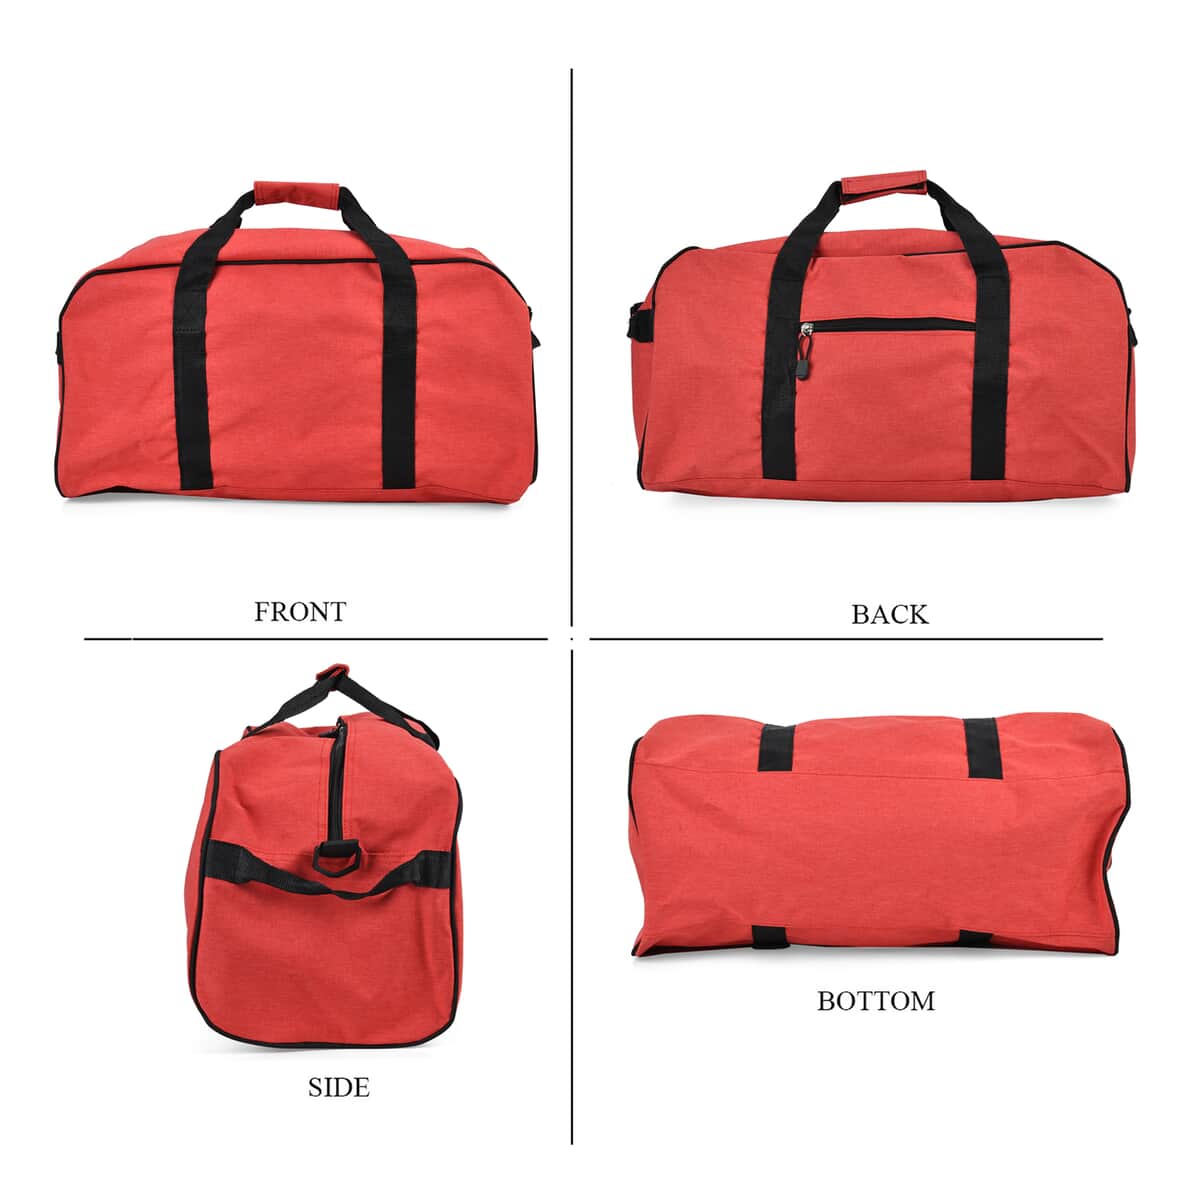 Red Weatherproof Travel Bag (20.9"x10.6"x9.8") with Handle Drop and Detachable Shoulder Strap image number 3